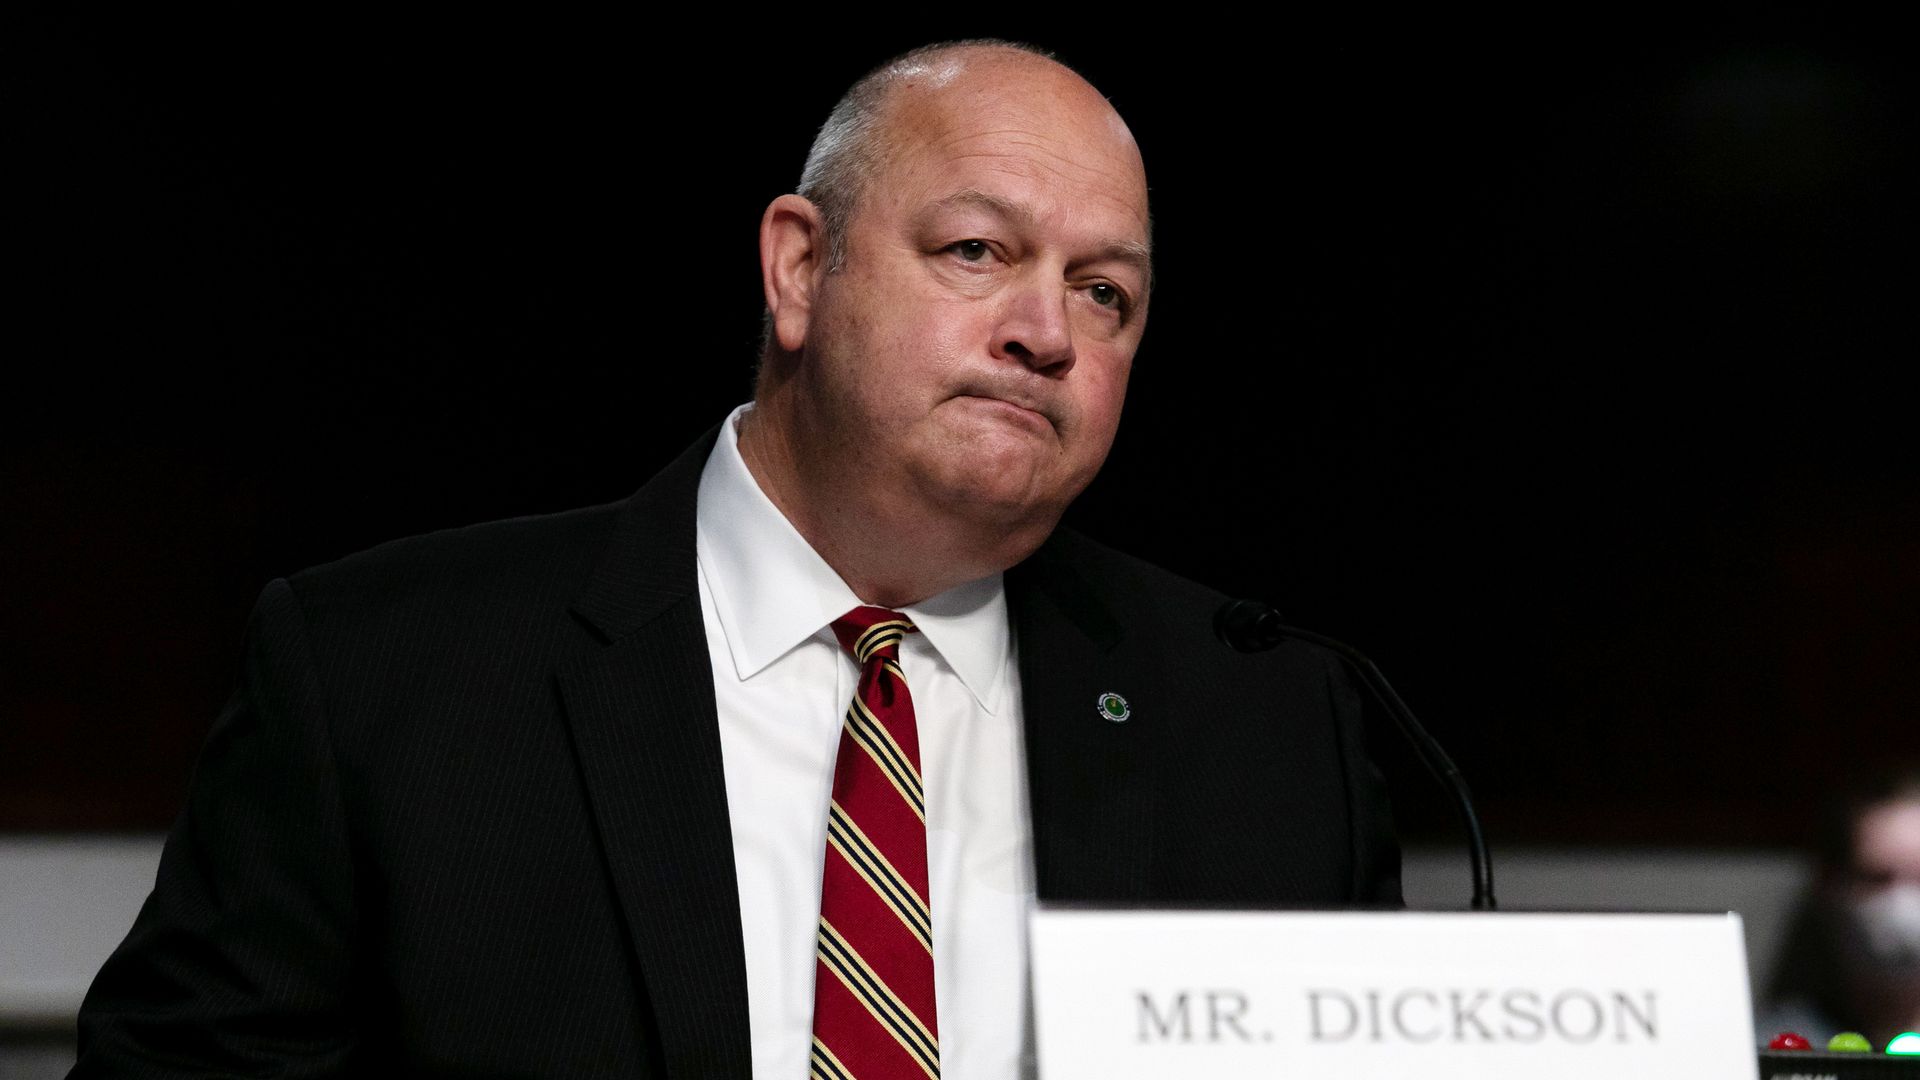 Federal Aviation Administration chief Steve Dickson testifies before a Senate panel examining safety certification of jetliners on June 17, 2020 in Washington, DC.